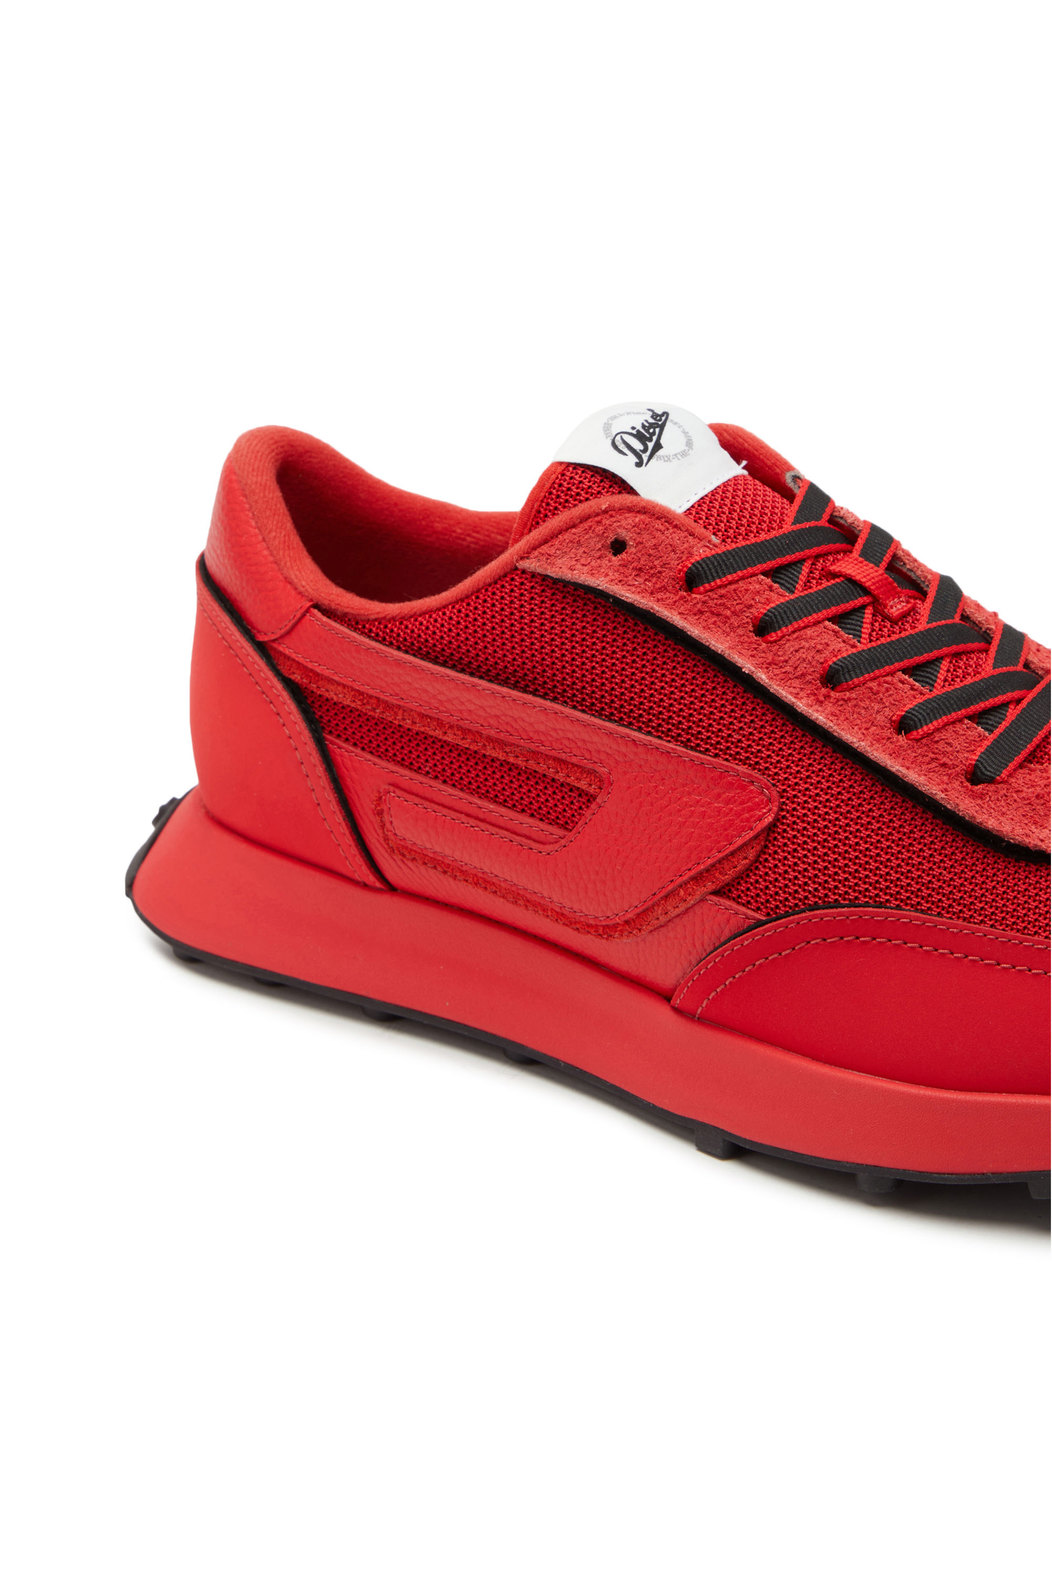 S-Racer Lc - Sneakers in mesh, suede and leather